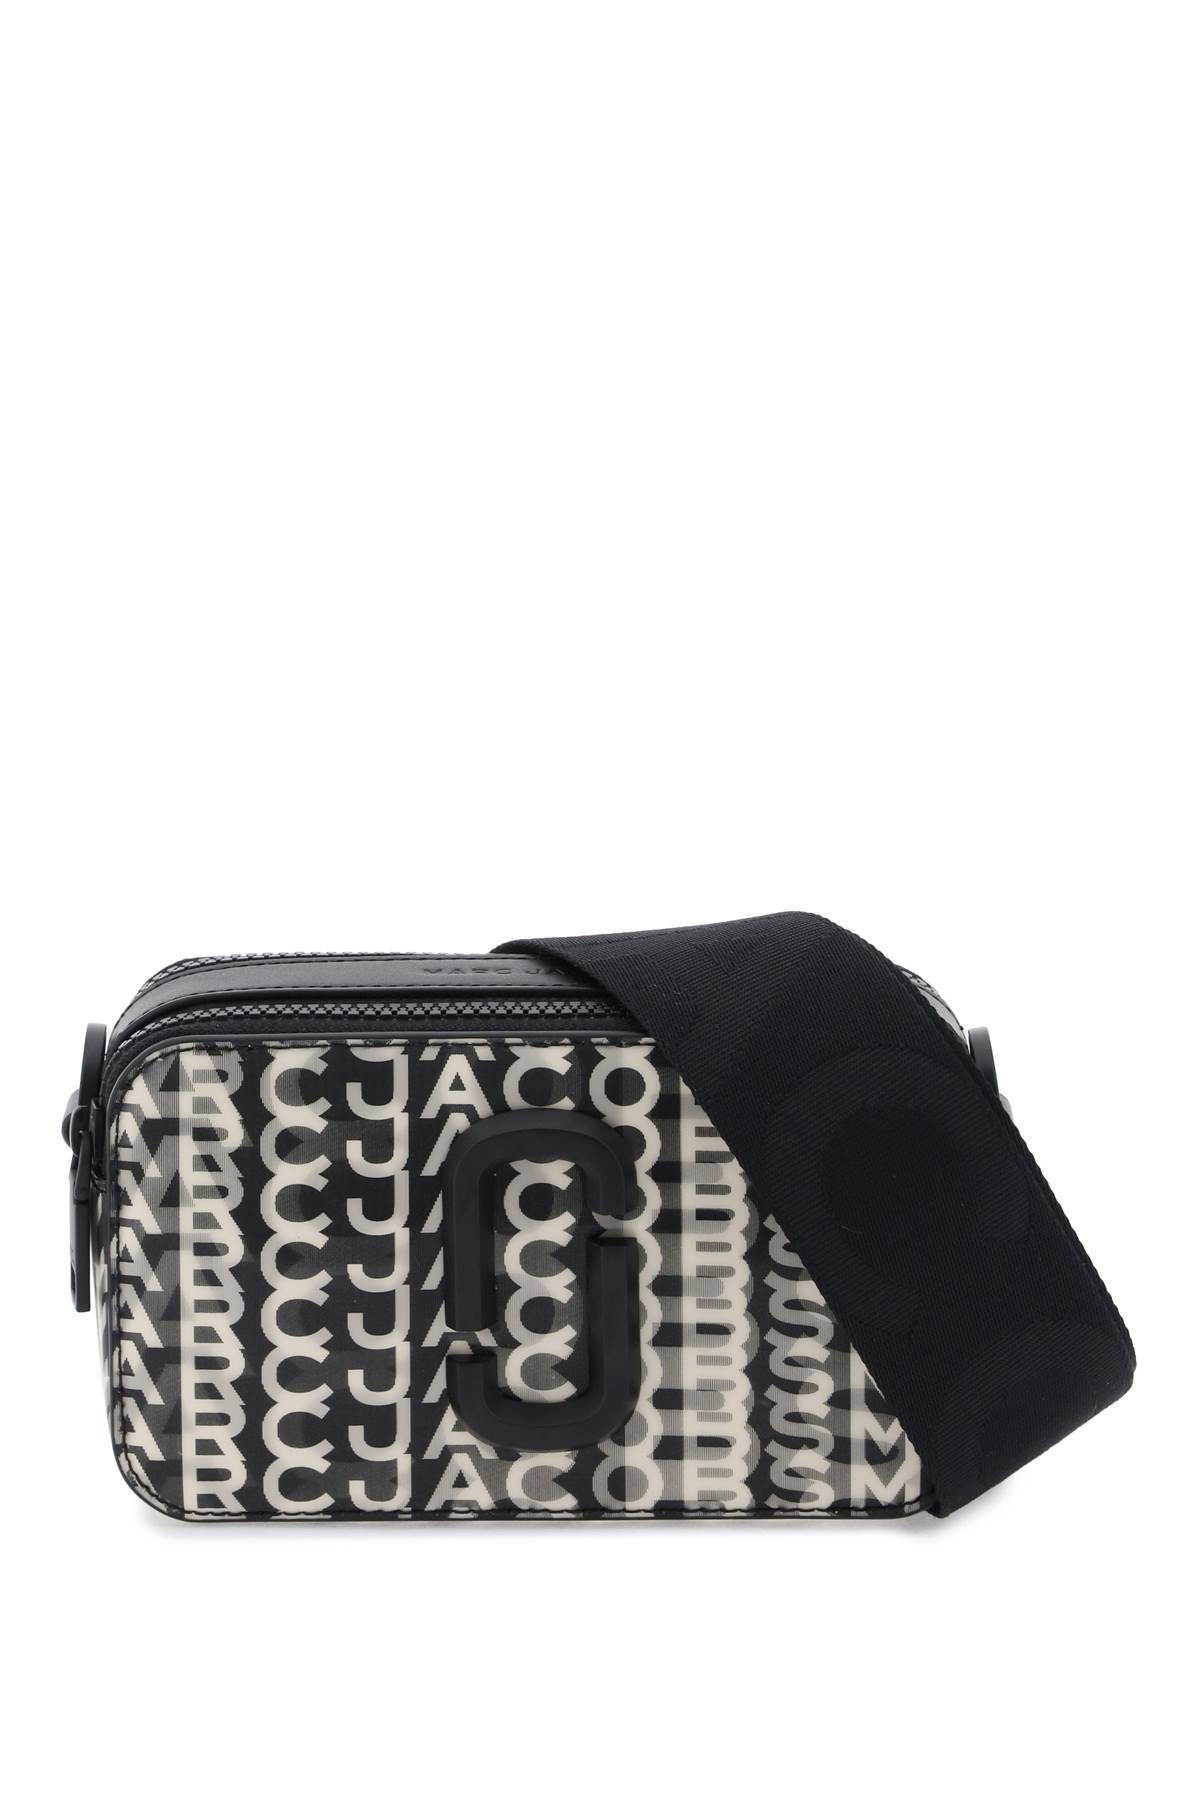 Marc Jacobs MARC JACOBS the snapshot bag with lenticular effect